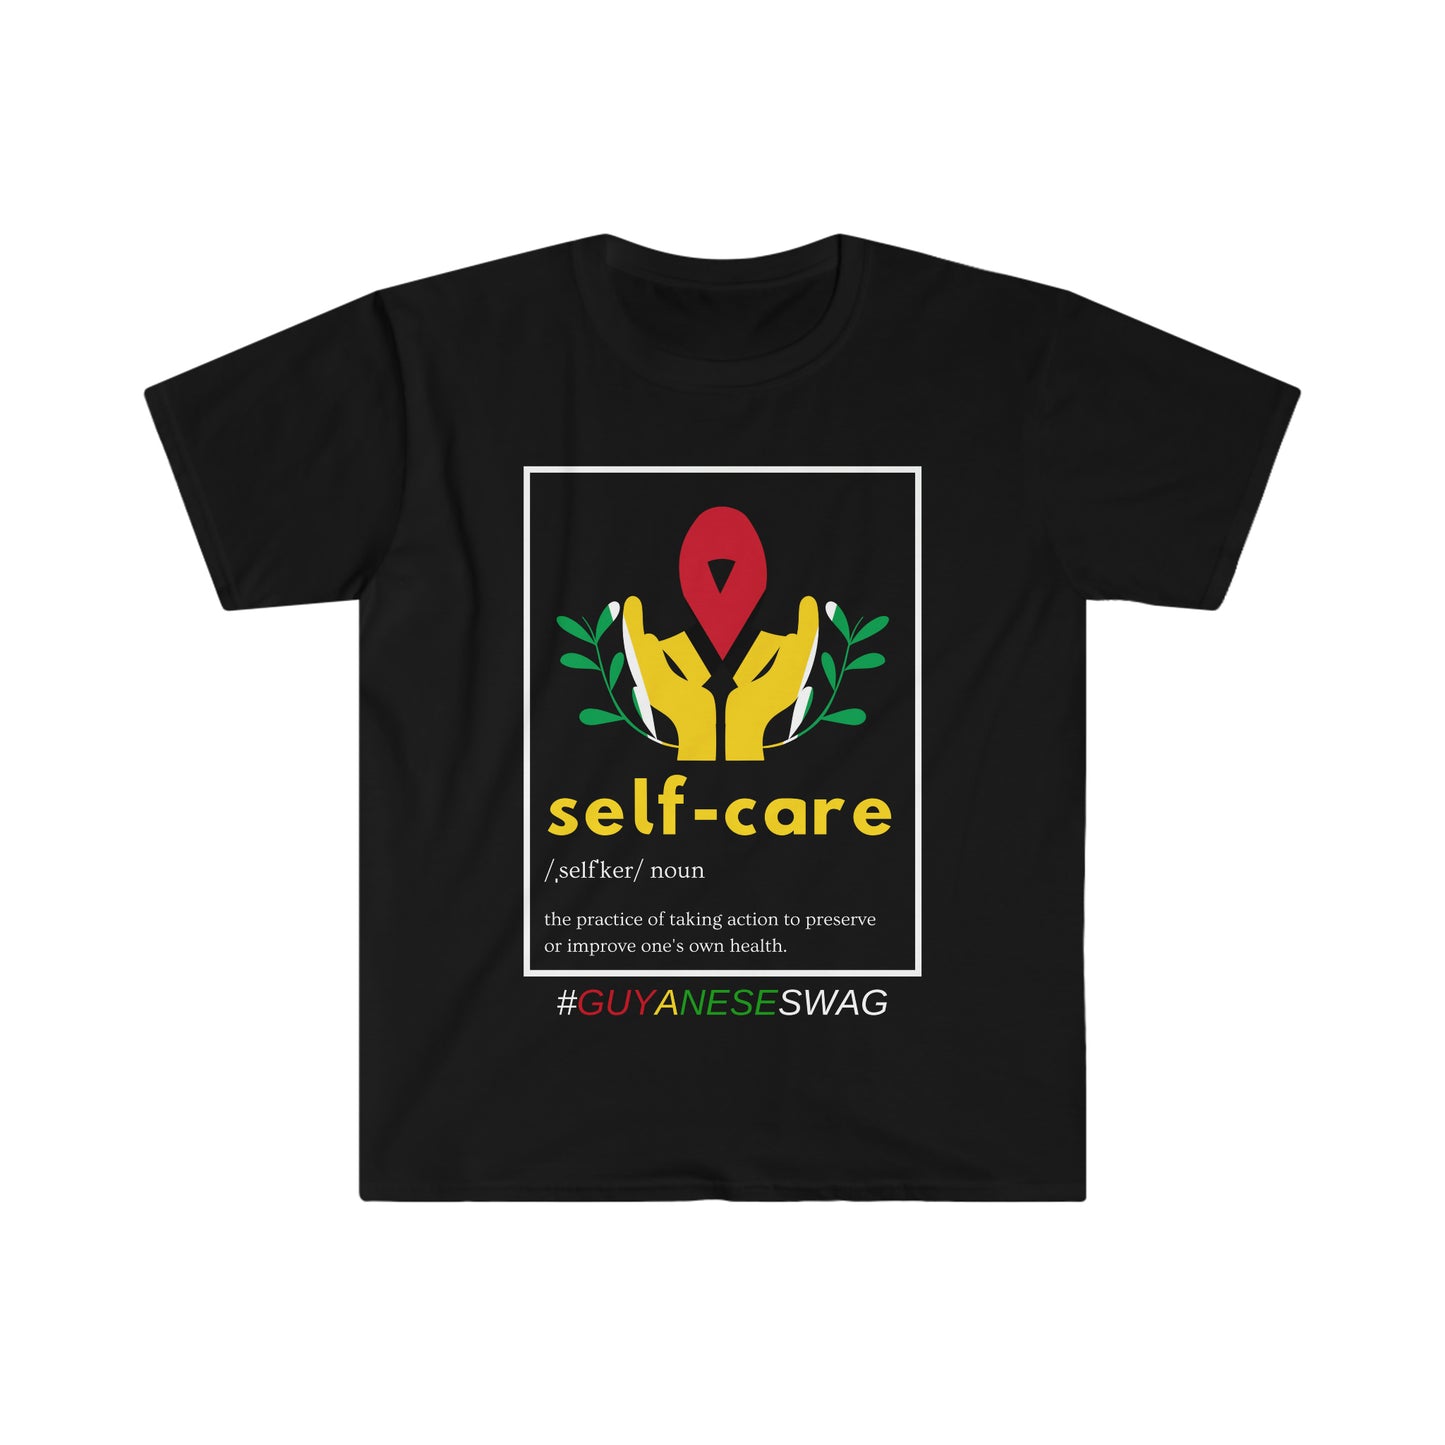 Self-Care Softstyle T-Shirt by Guyanese Swag